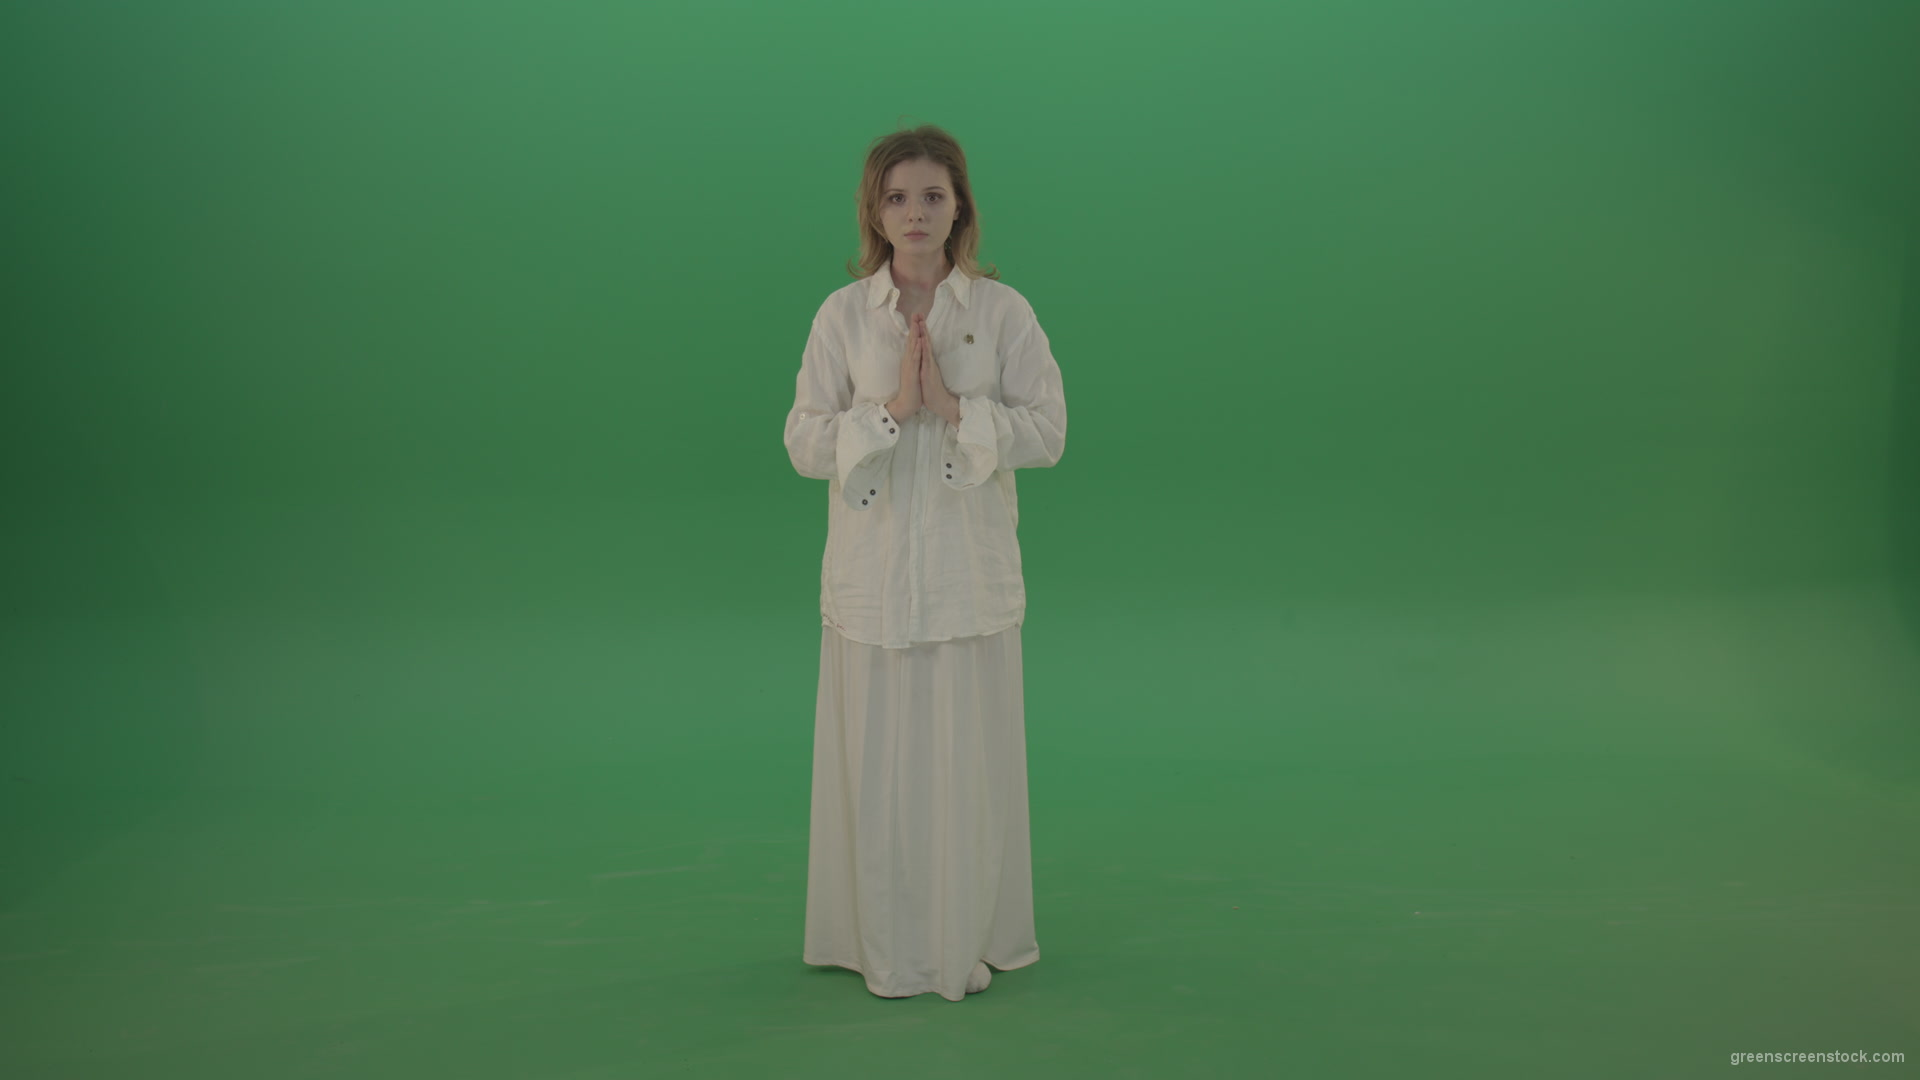 Girl-wearing-a-white-suit-pray-to-god-isolated-on-green-background_001 Green Screen Stock